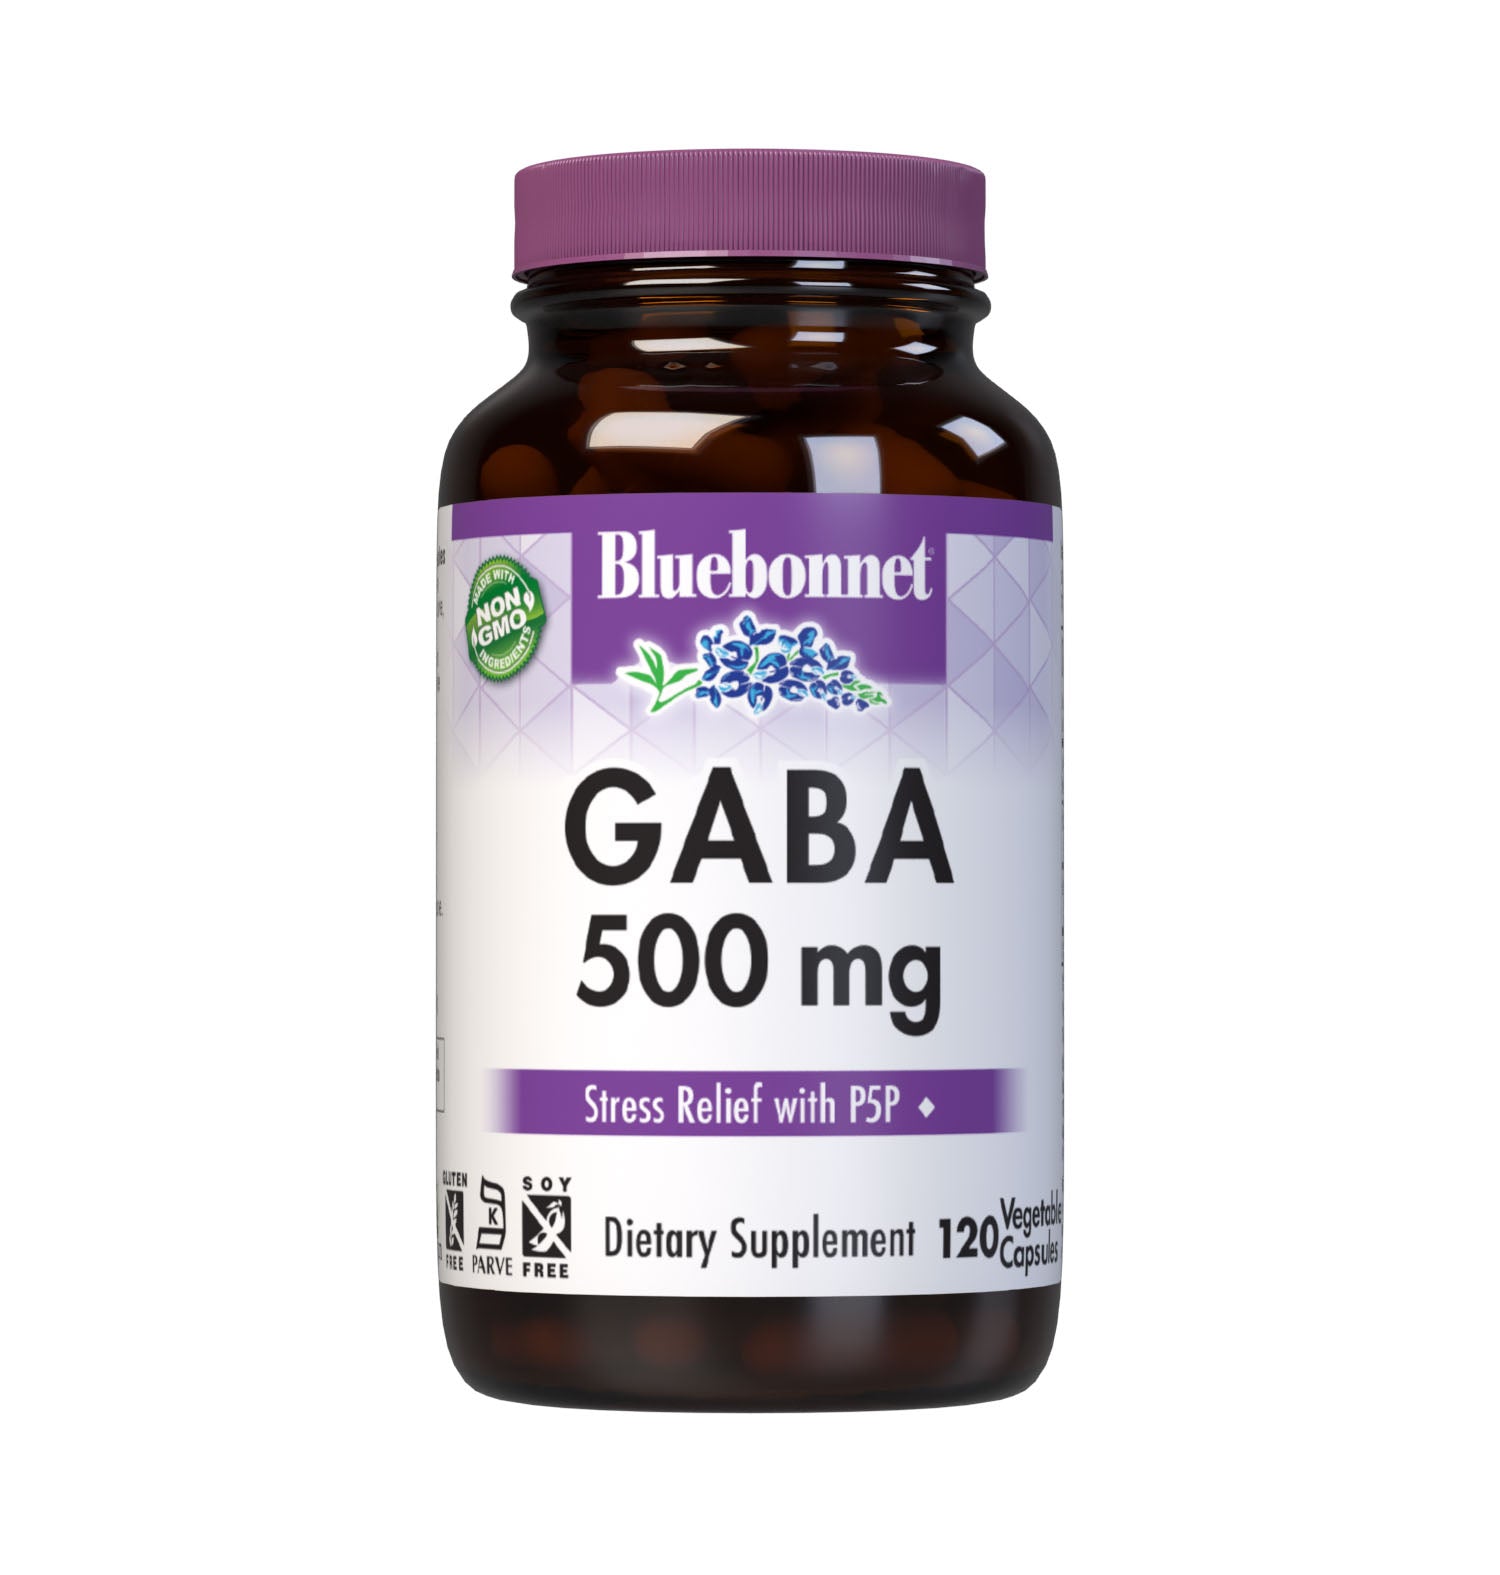 Bluebonnet’s GABA 500 mg 120 Vegetable Capsules are specially formulated to help the body and mind adapt and cope with occasional stressors while supporting an overall sense of relaxation utilizing a combination of gamma-aminobutyric acid (GABA) and the cellular active, coenzyme form of vitamin B6, pyridoxal 5’ phosphate. #size_120 count